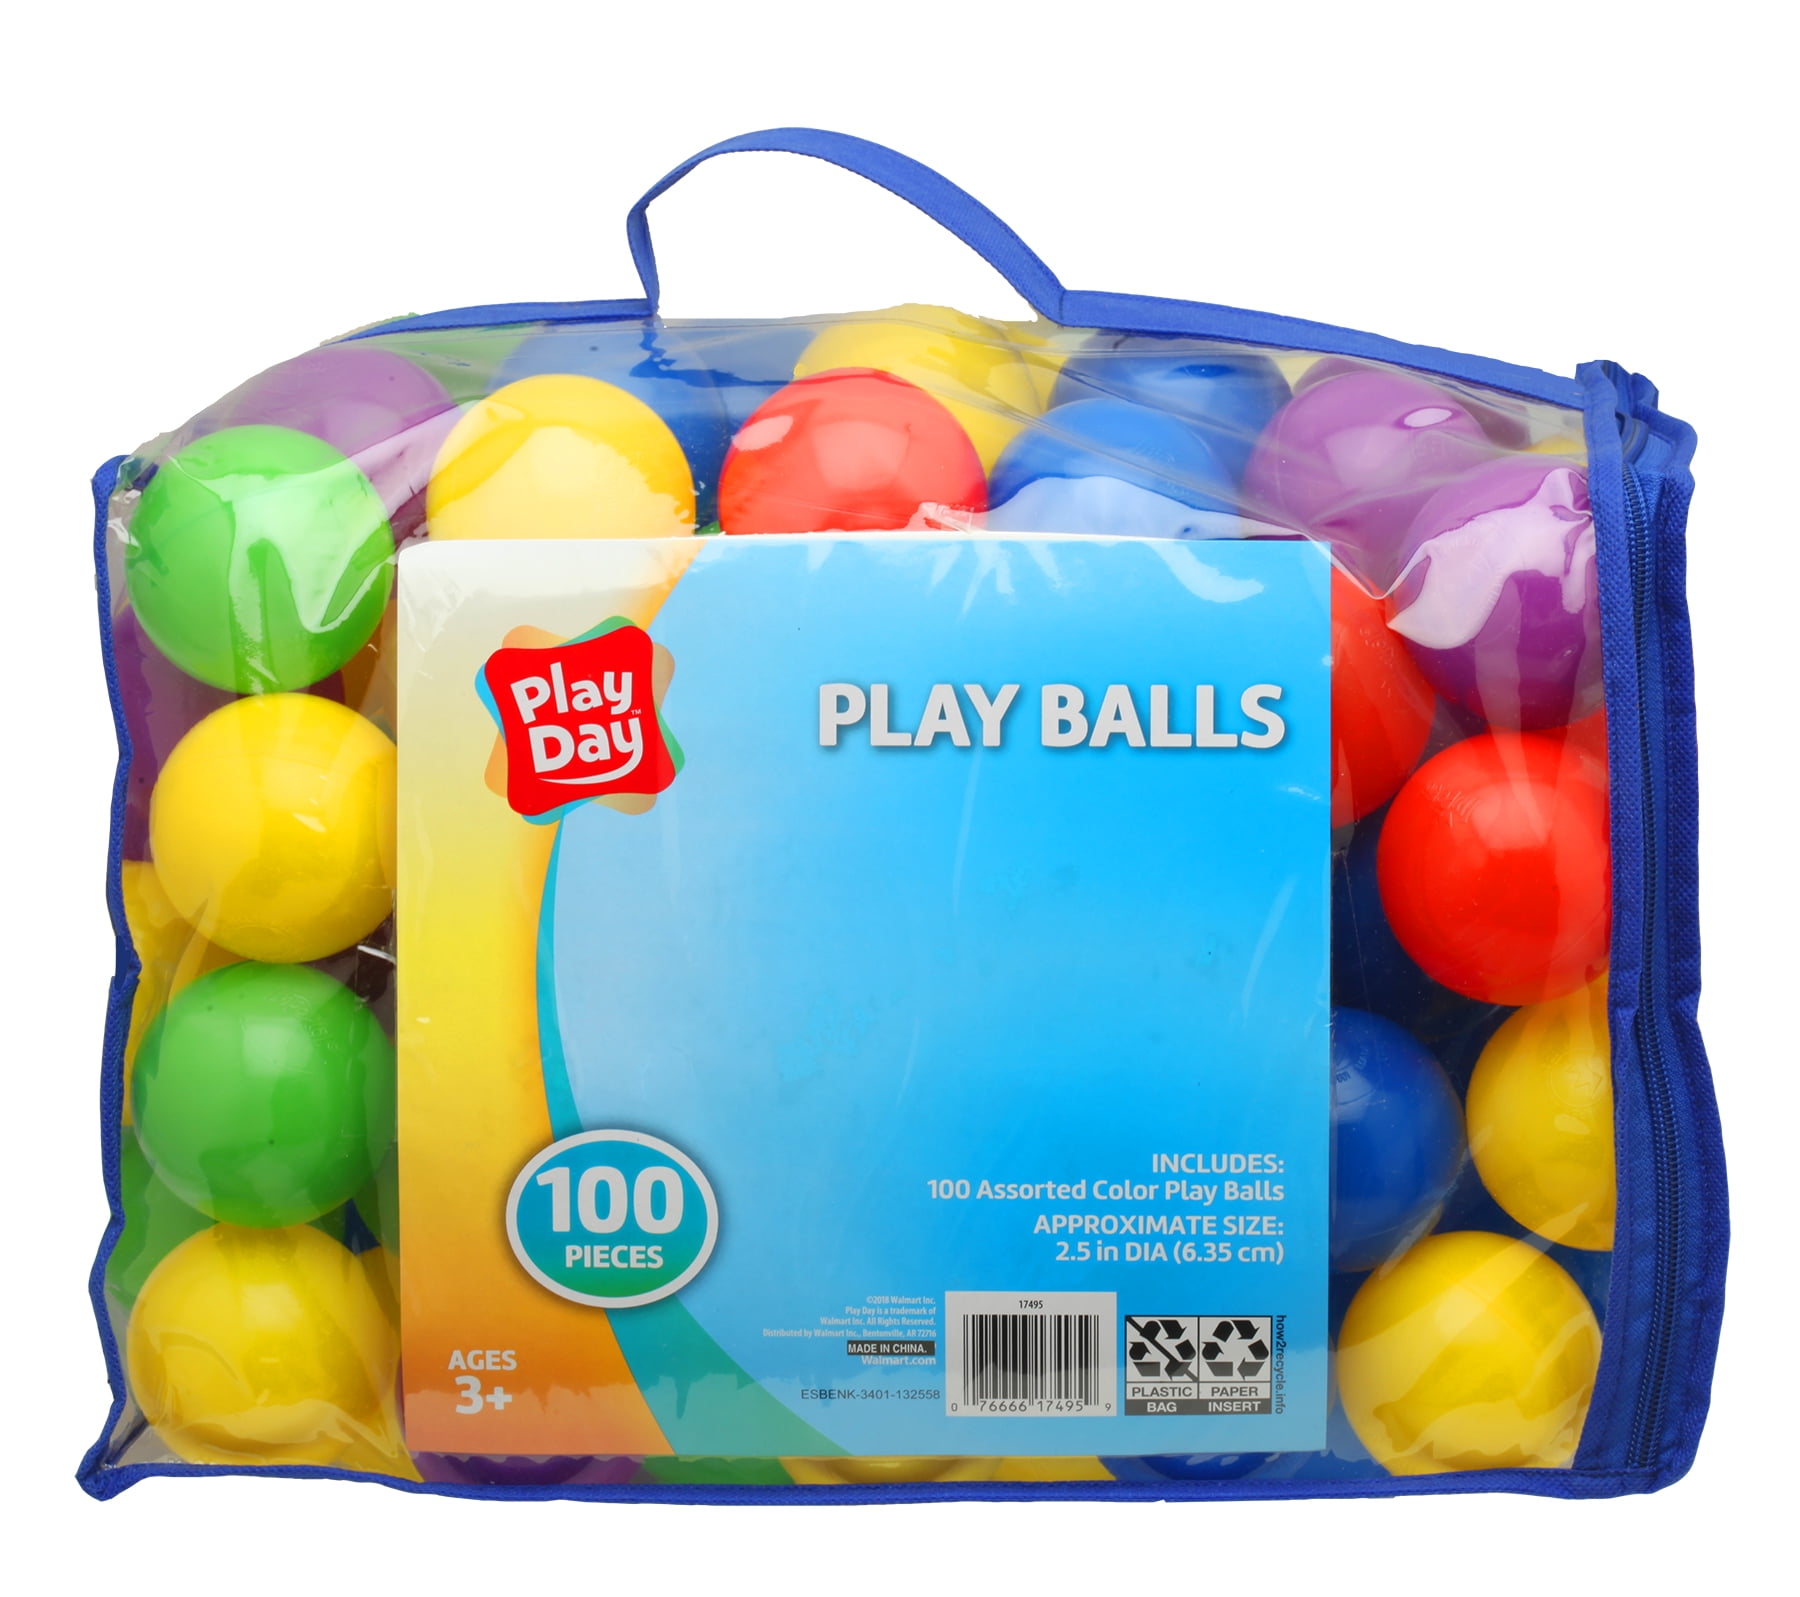 4 Bright Colors for Baby/ Toddler/ Kids Birthday Party Decoration &Ball Pit/Ball Pool 100 Ball Pit Balls Plastic Balls 2.17 inches 